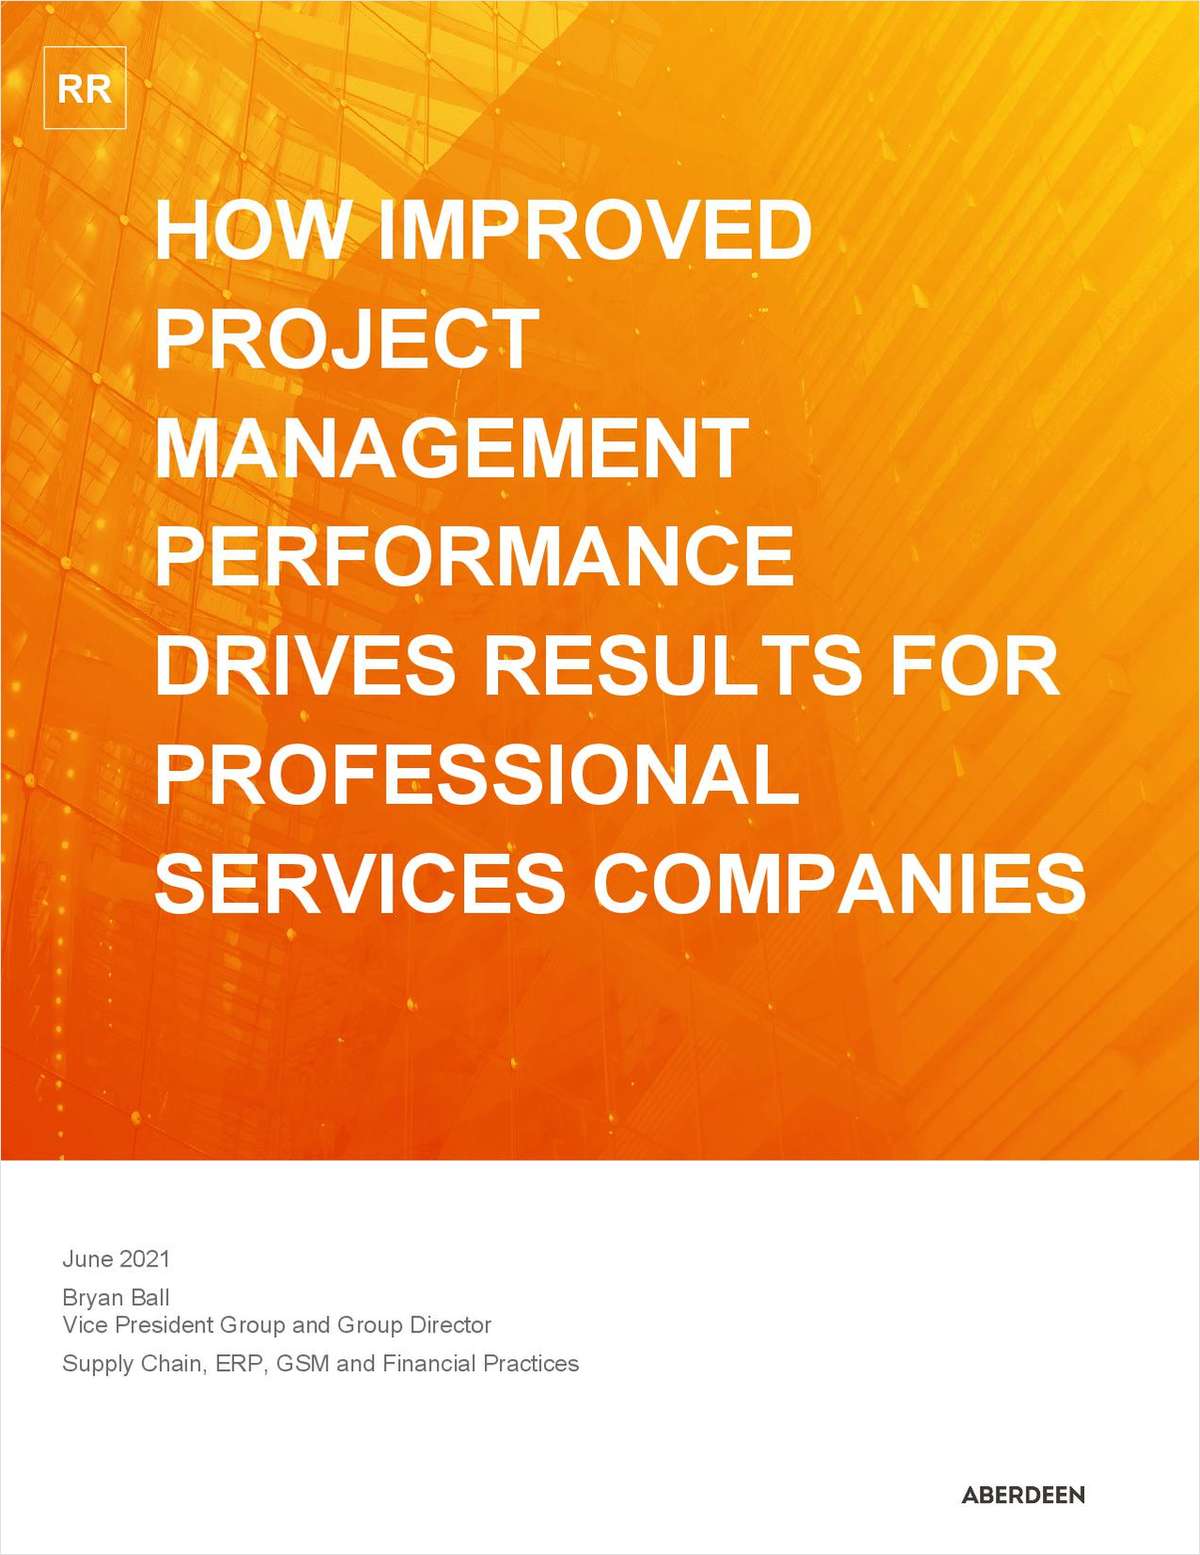 How Improved Project Management Performance Drives Results for Professional Services Companies